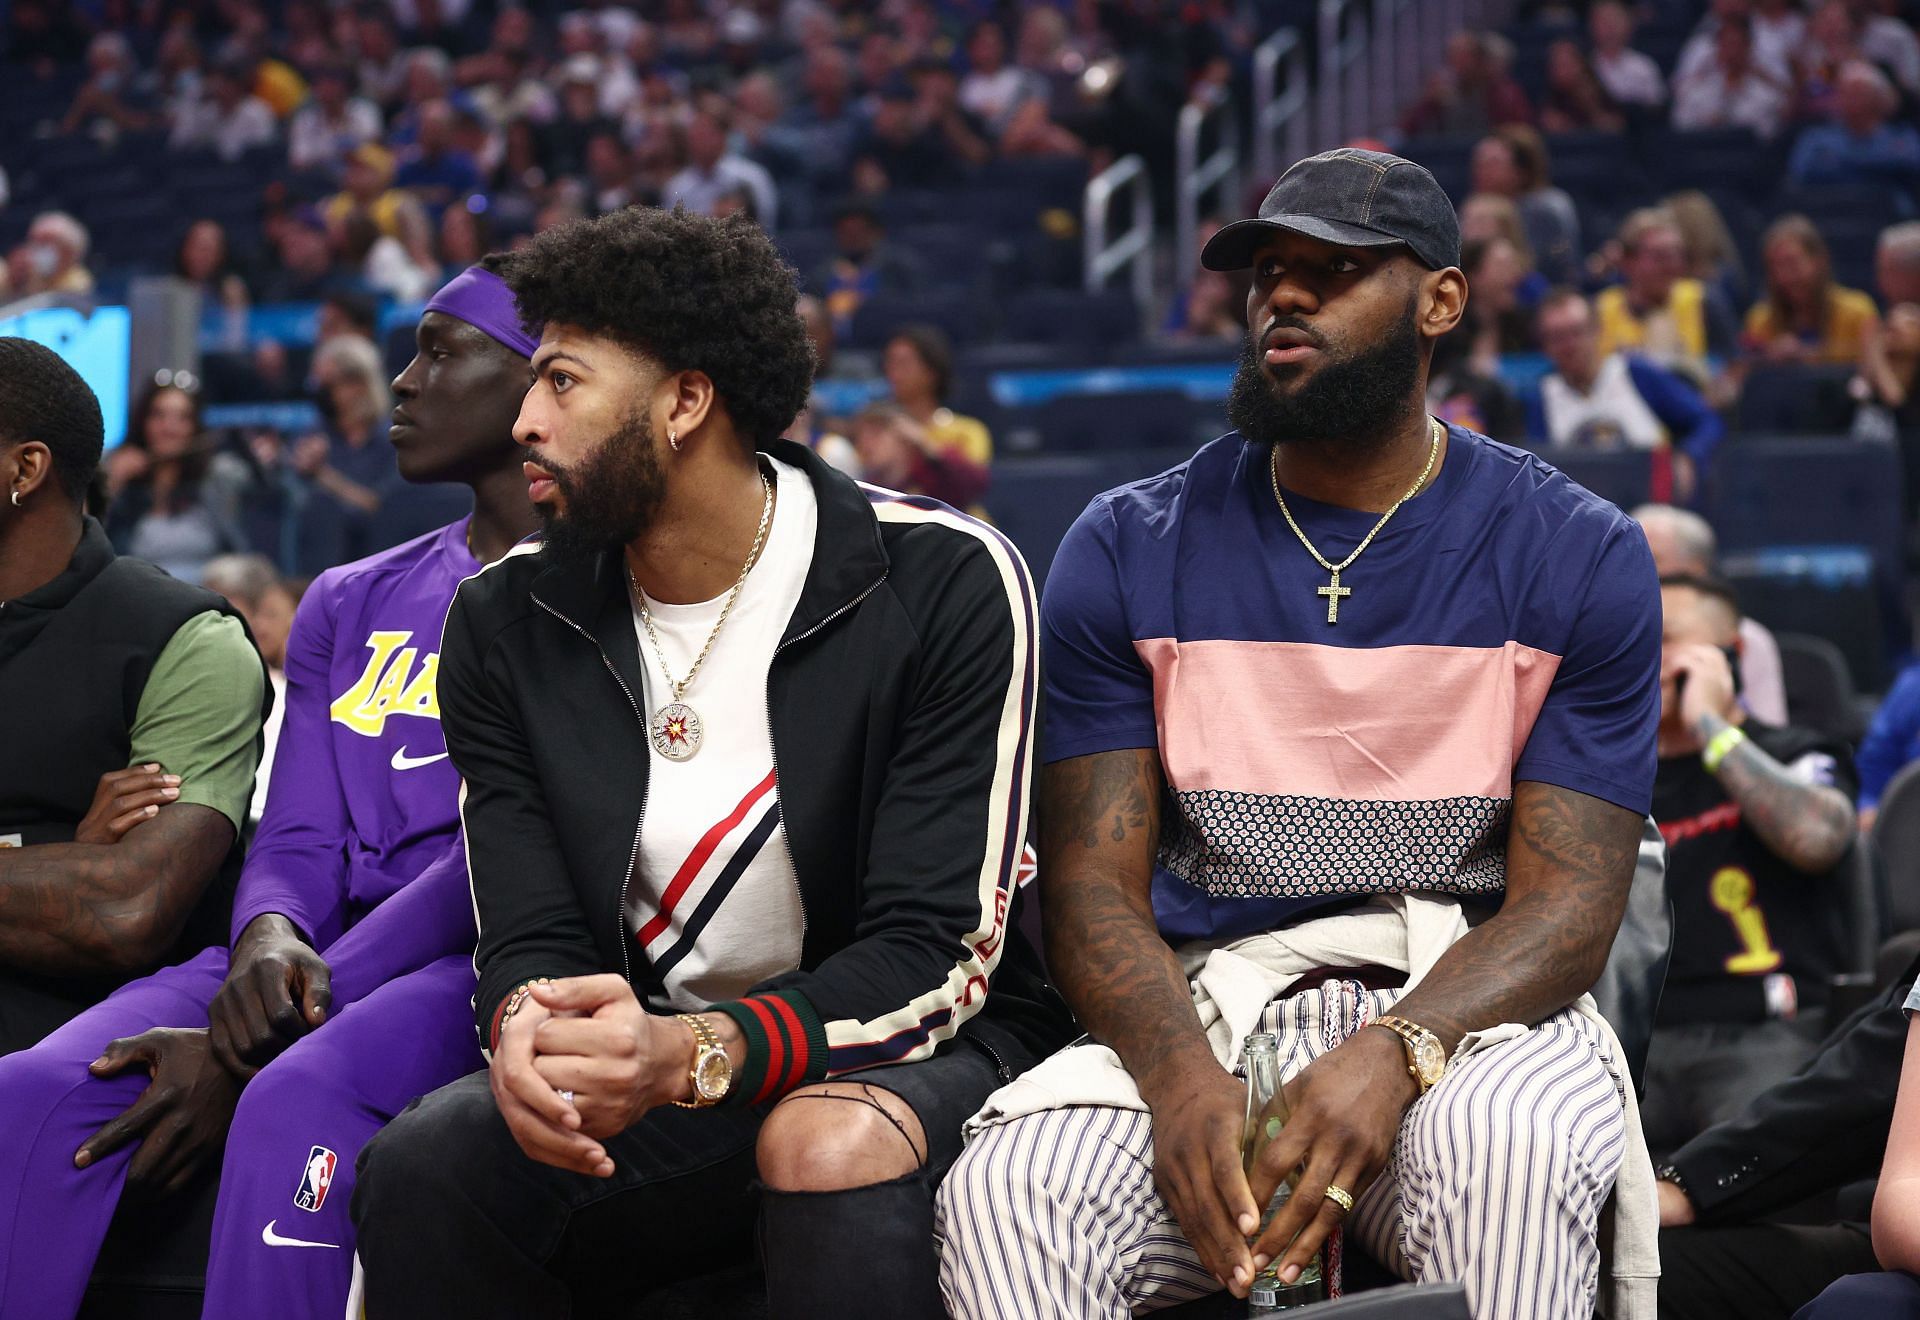 LeBron James is a big fan of &quot;The Godfather&quot; movies.